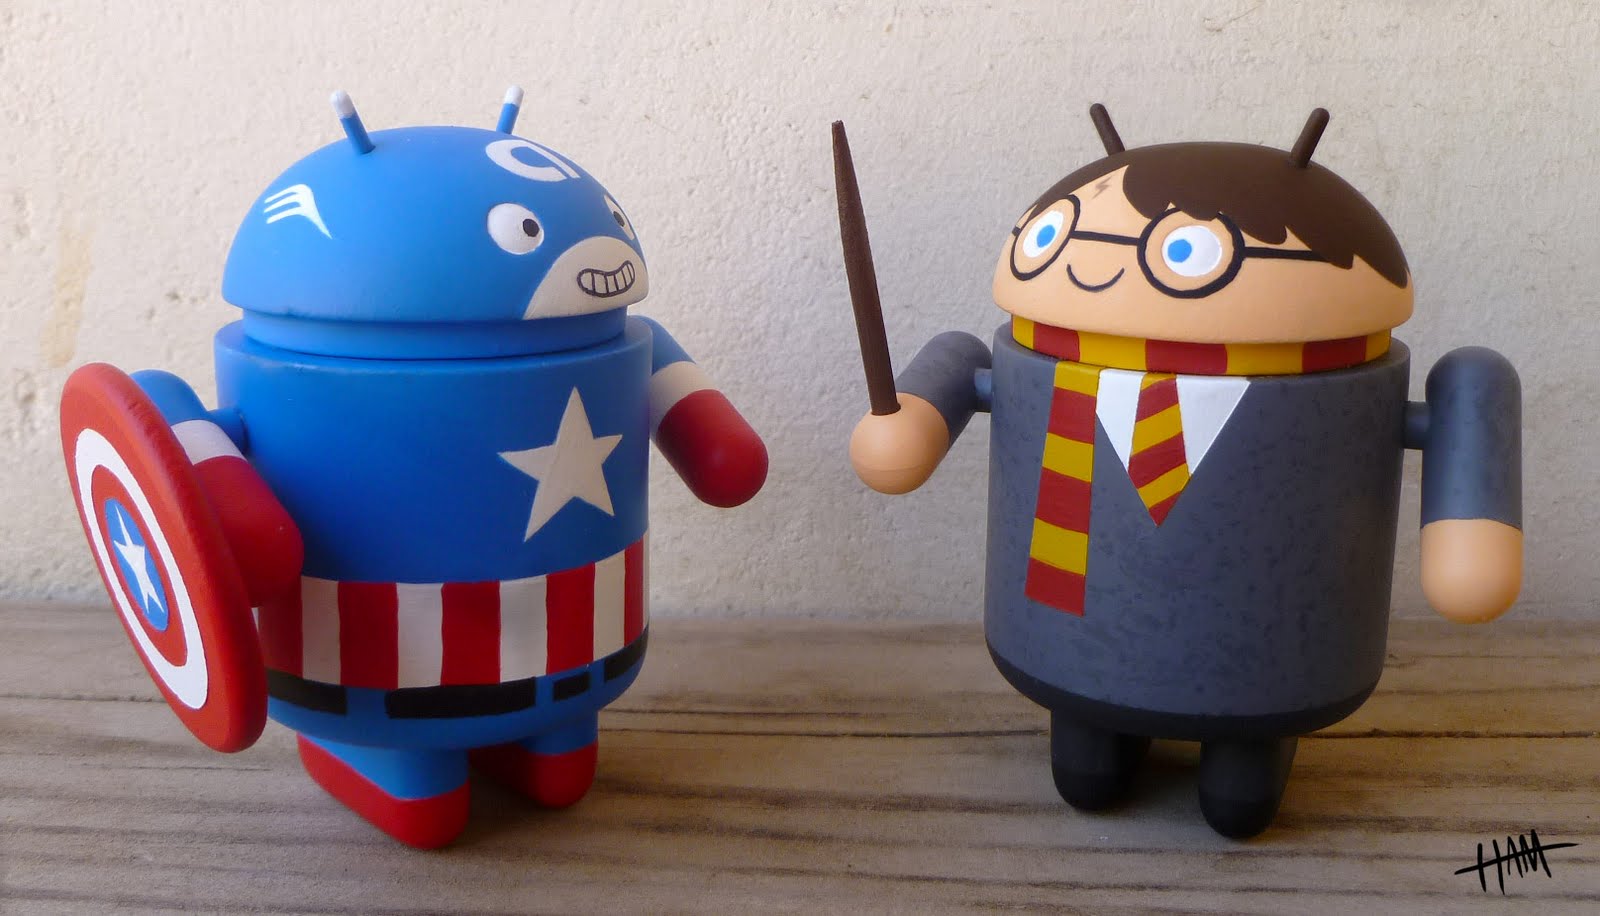 http://2.bp.blogspot.com/-TWQJ7BfKSf4/TiTysTyJYpI/AAAAAAAANSw/kjJuyt_5STw/s1600/San+Diego+Comic-Con+2011+Exclusive+Captain+America+%2526+Harry+Potter+Custom+Androids+by+Gary+Ham.jpg